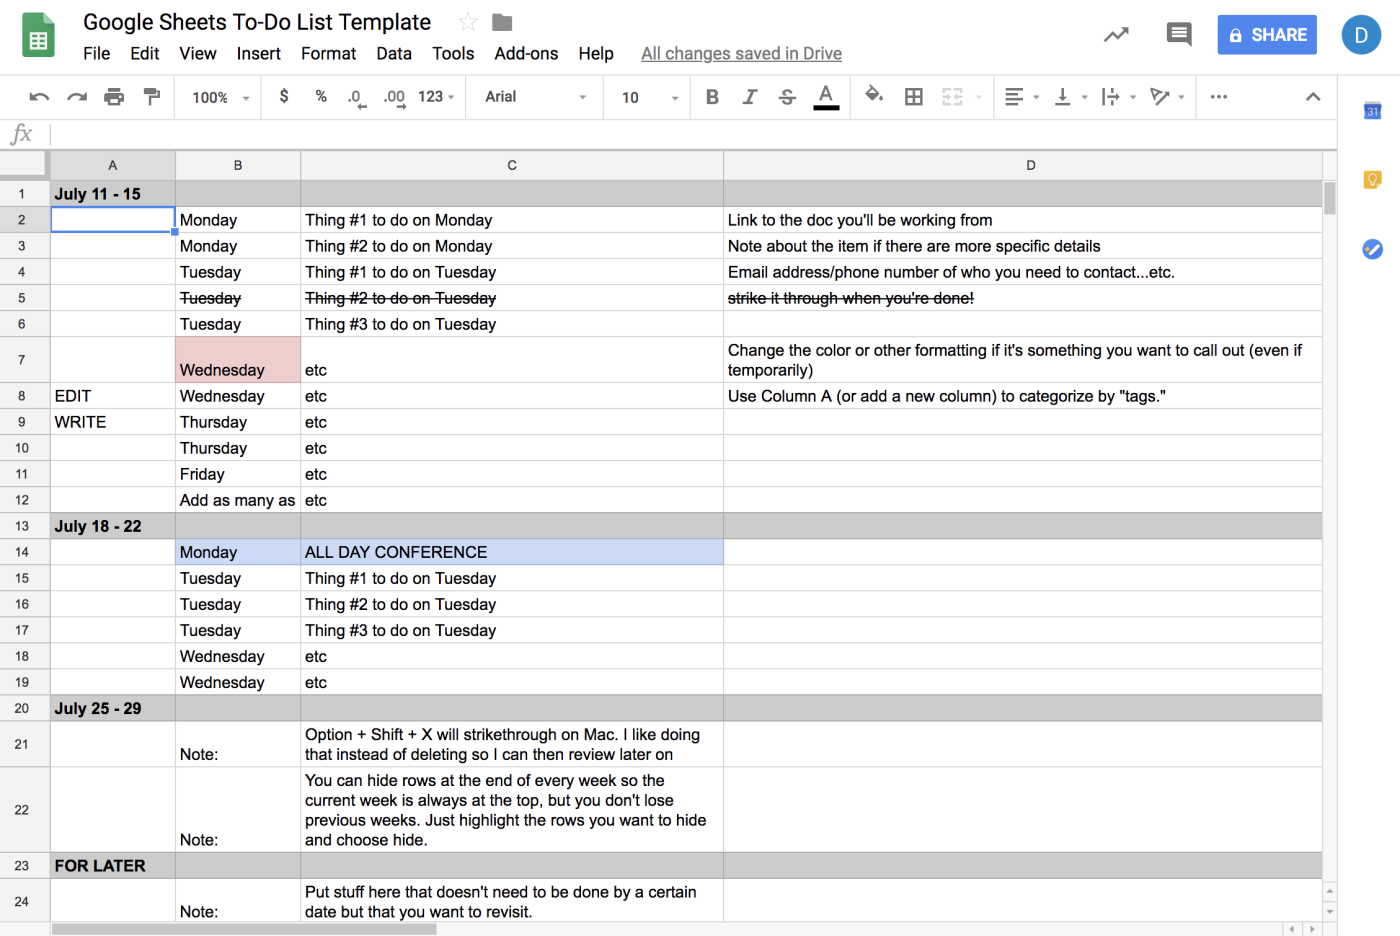 Why Google Sheets should be your todo list (with template) purshoLOGY